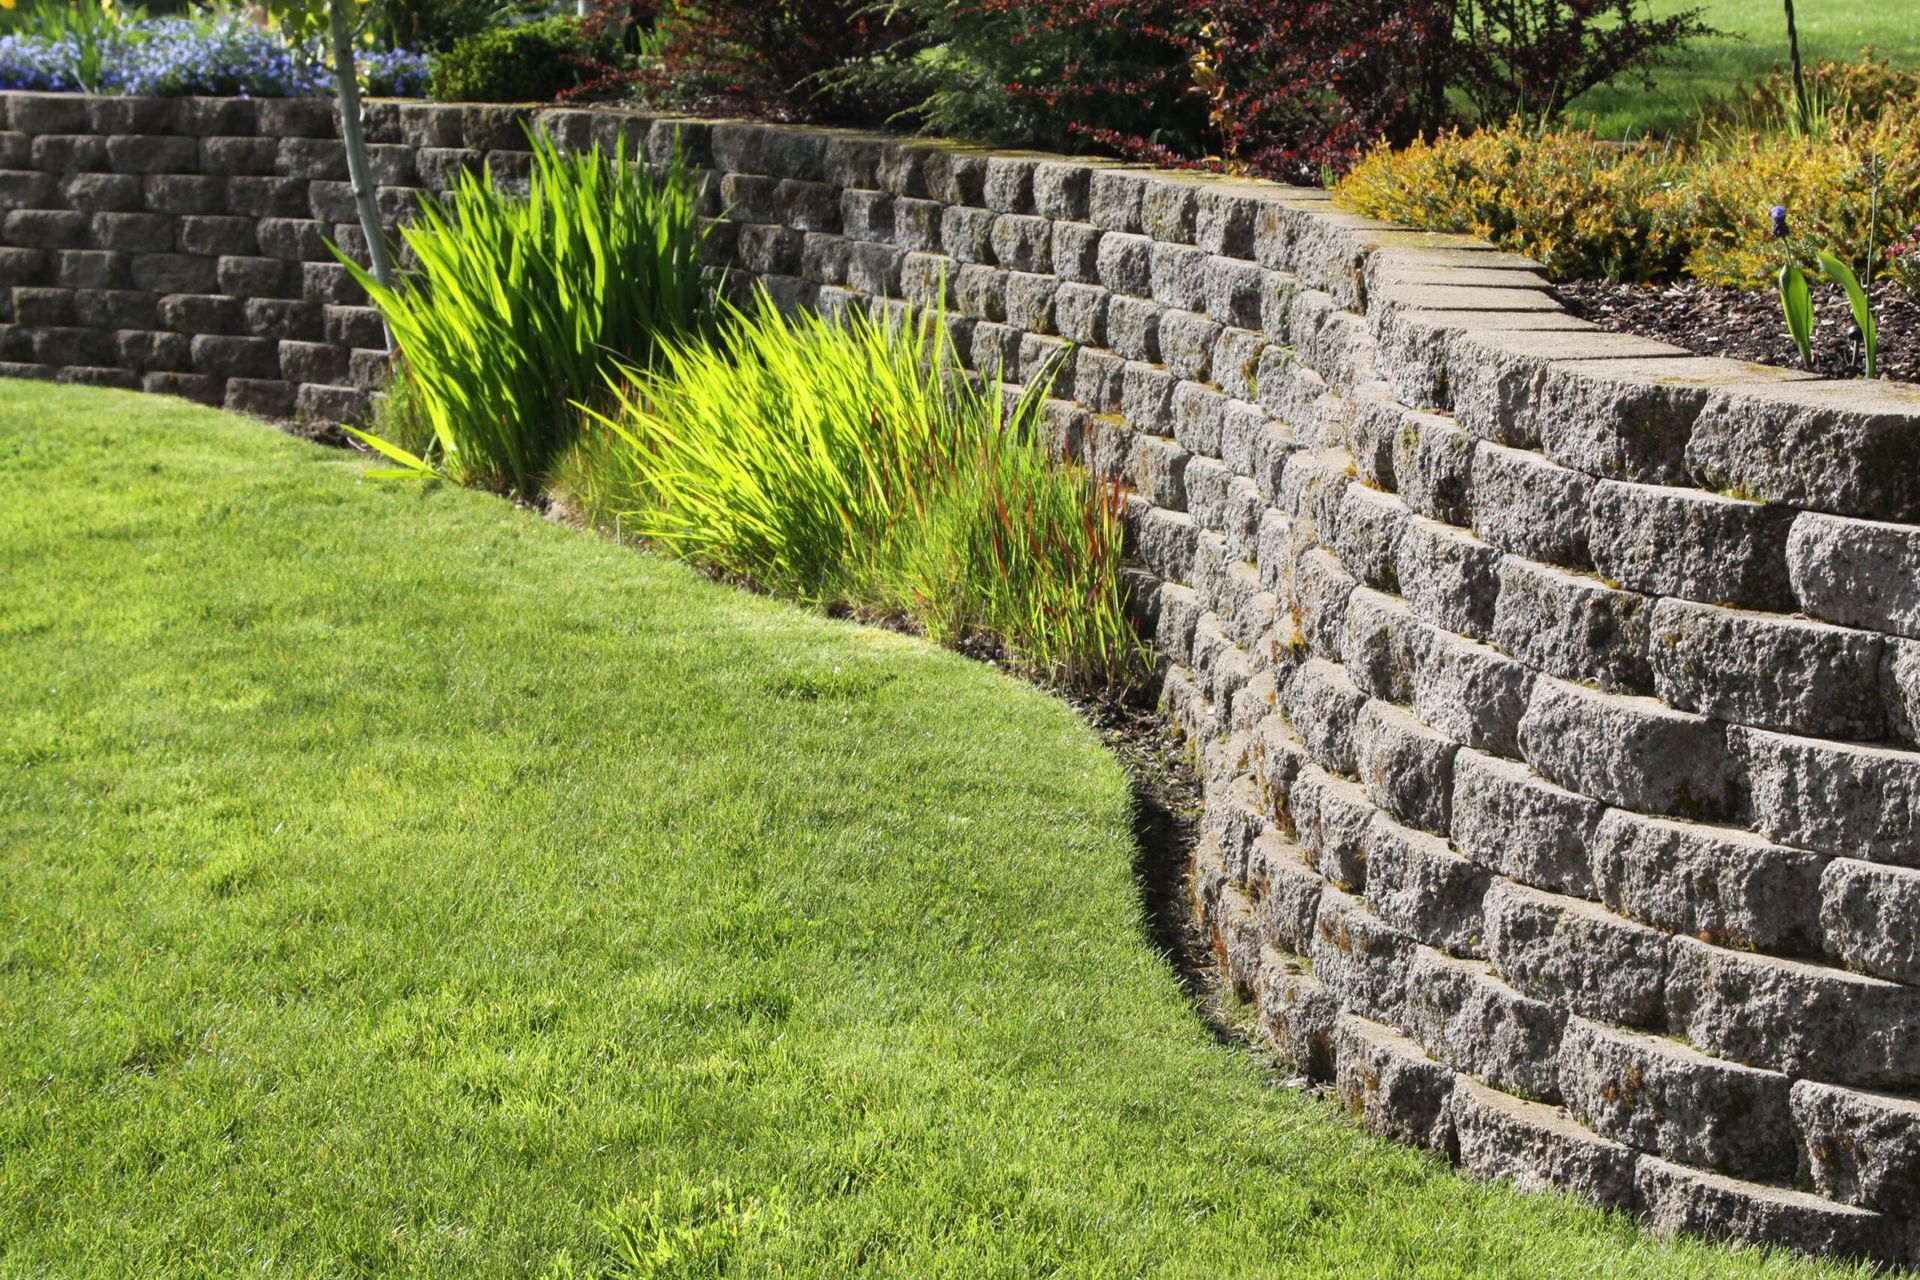 Sturdy retaining wall made of concrete blocks, providing structural support and preventing soil erosion in a landscaped garden.